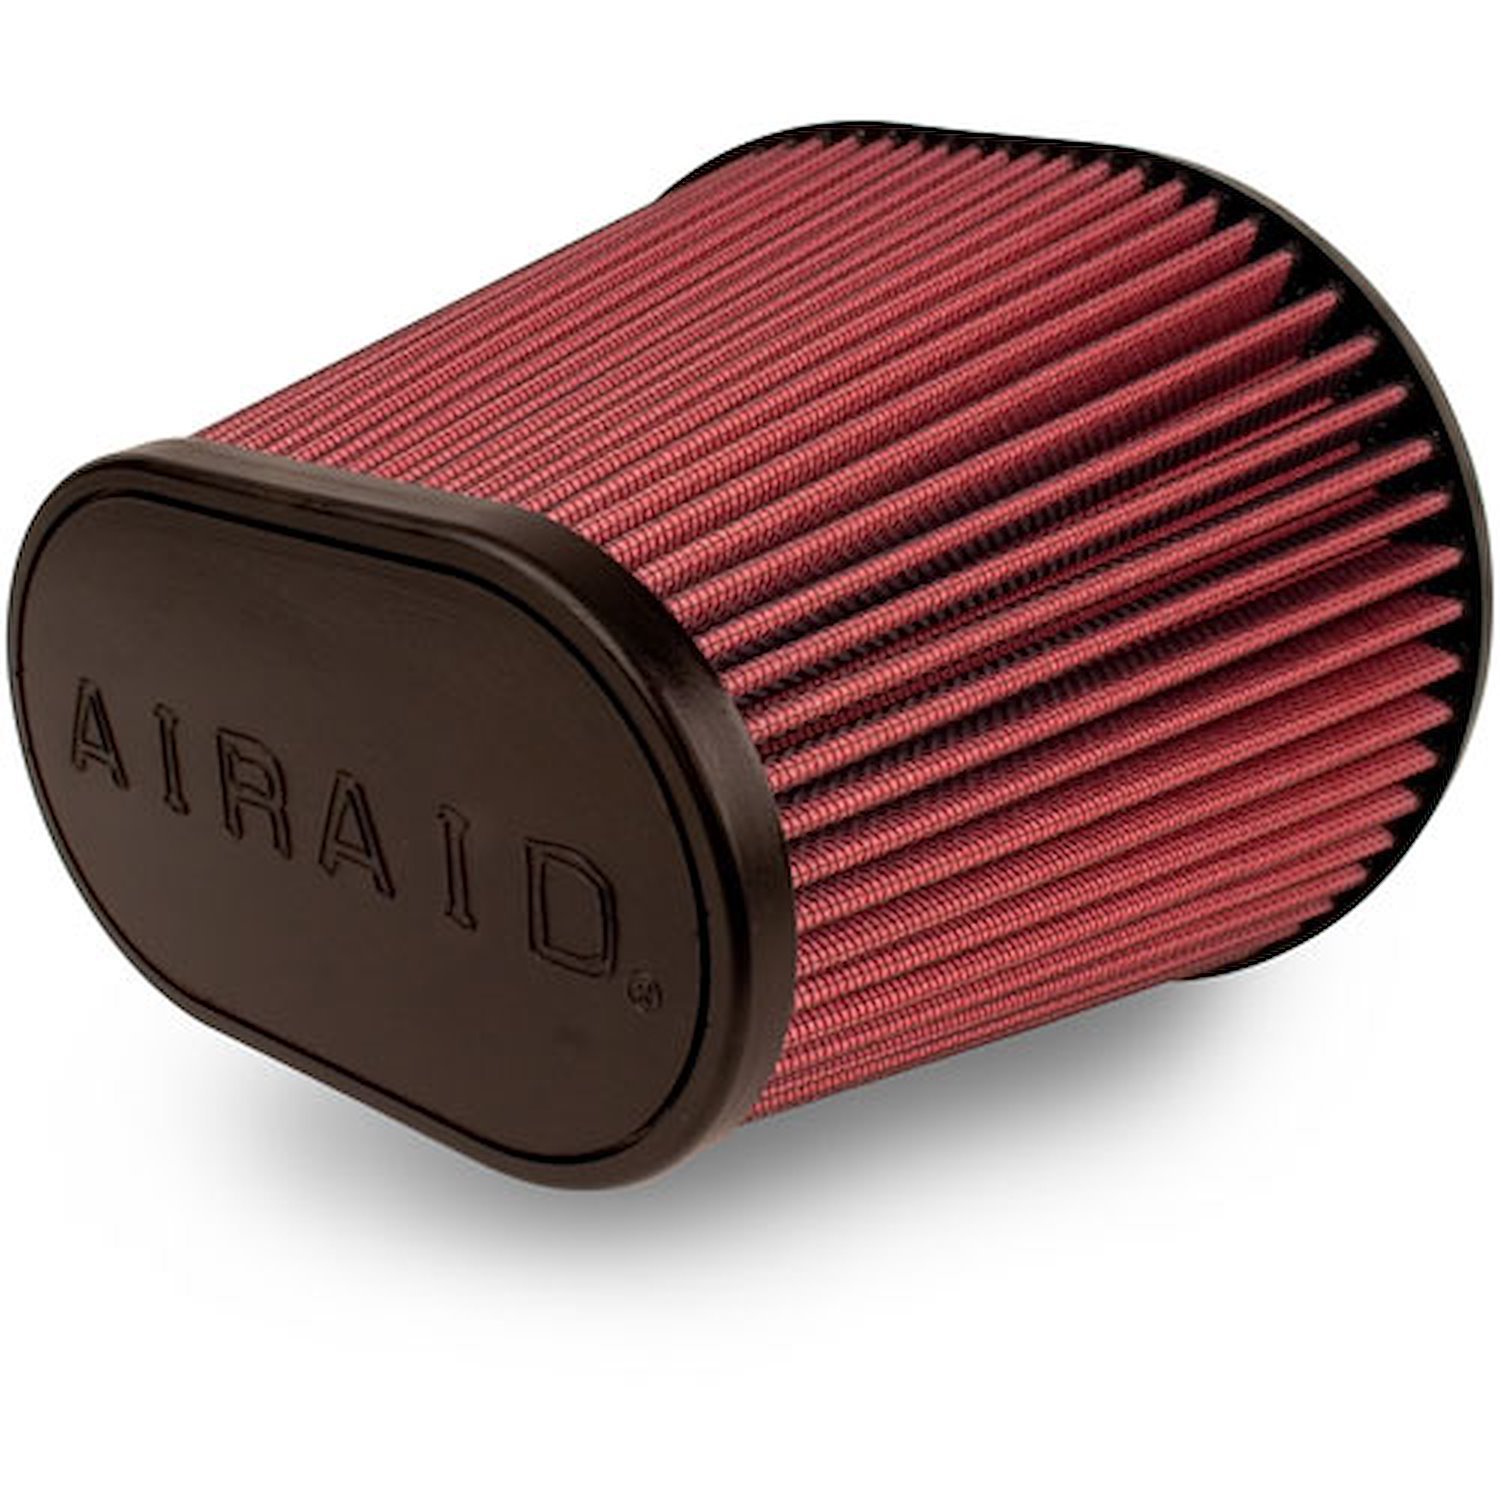 Universal Cone Air Filter SynthaFlow 